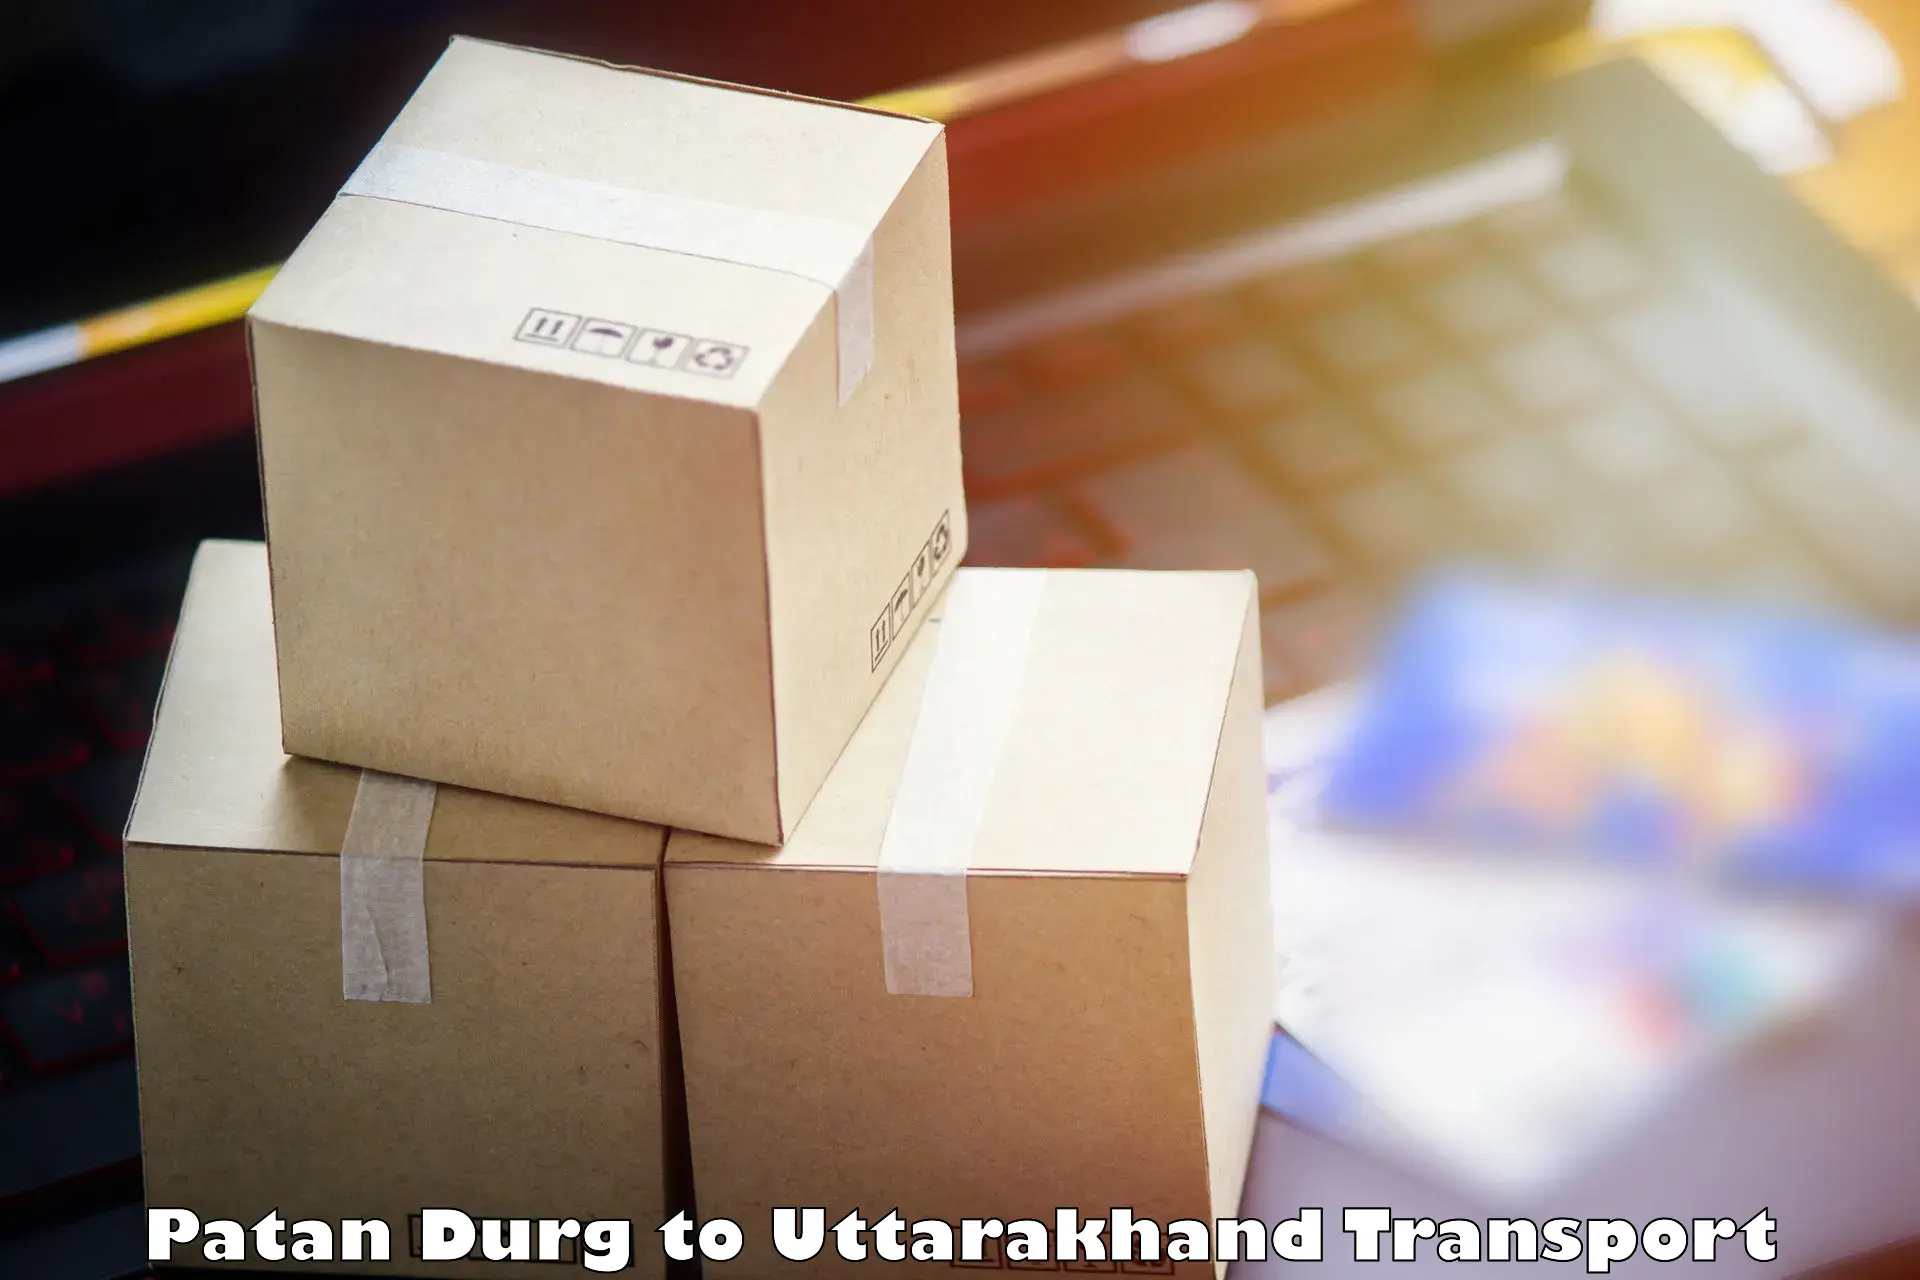 Container transport service Patan Durg to IIT Roorkee